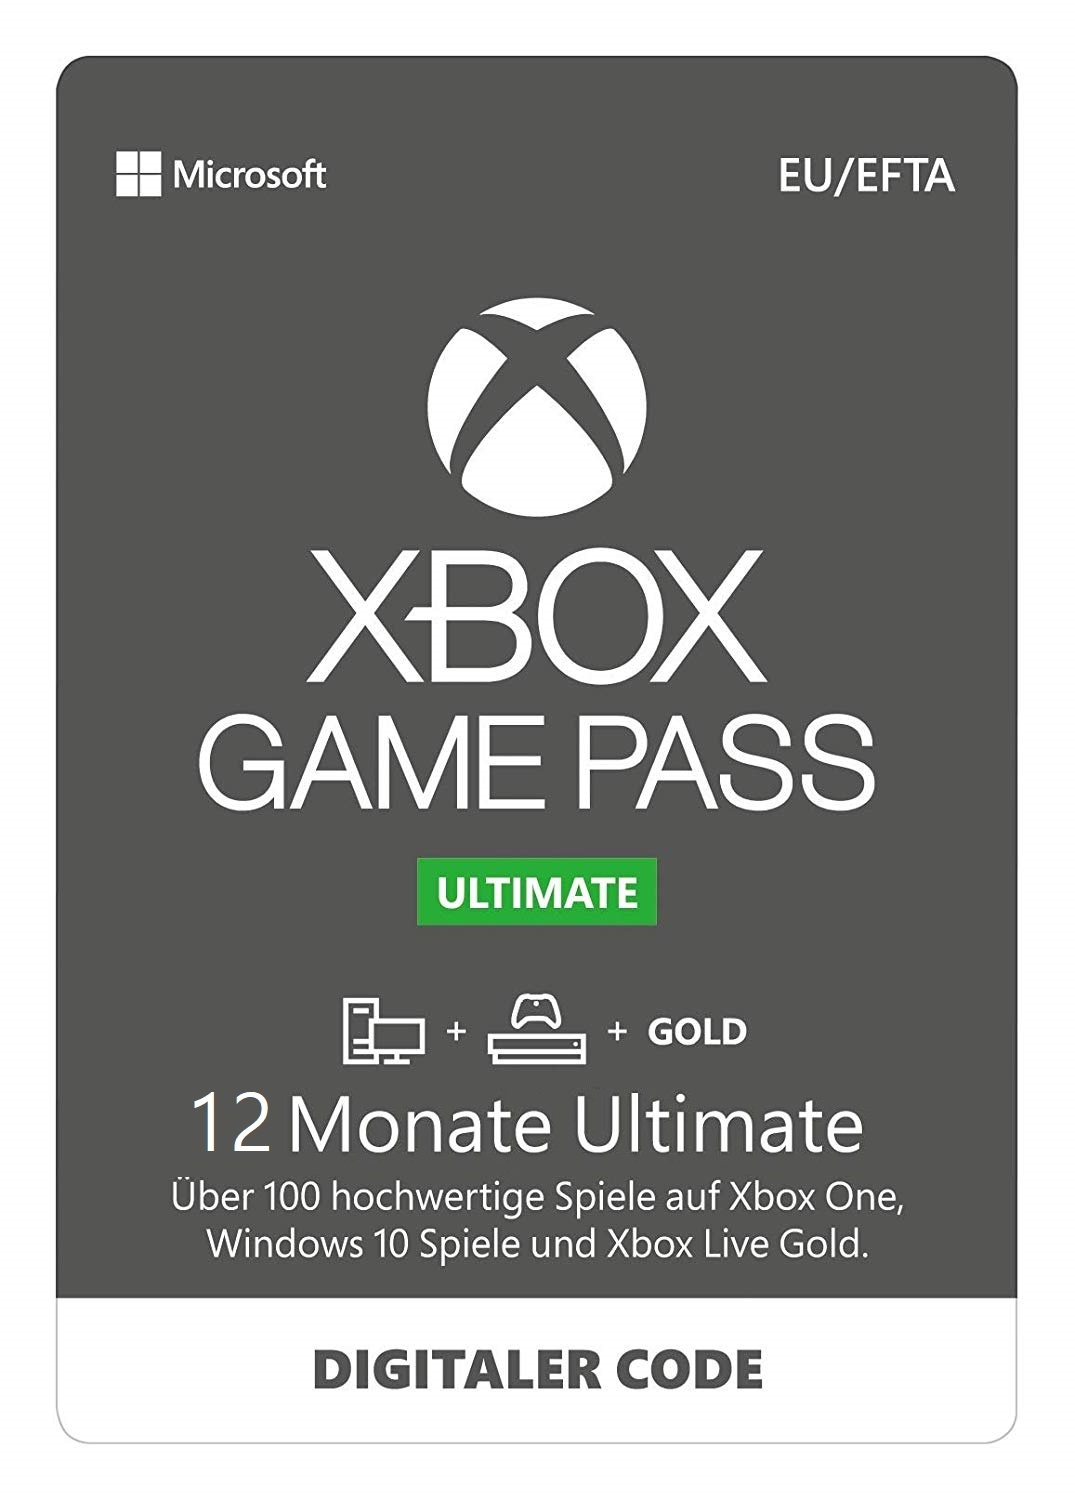 xbox ultimate game pass vs game pass